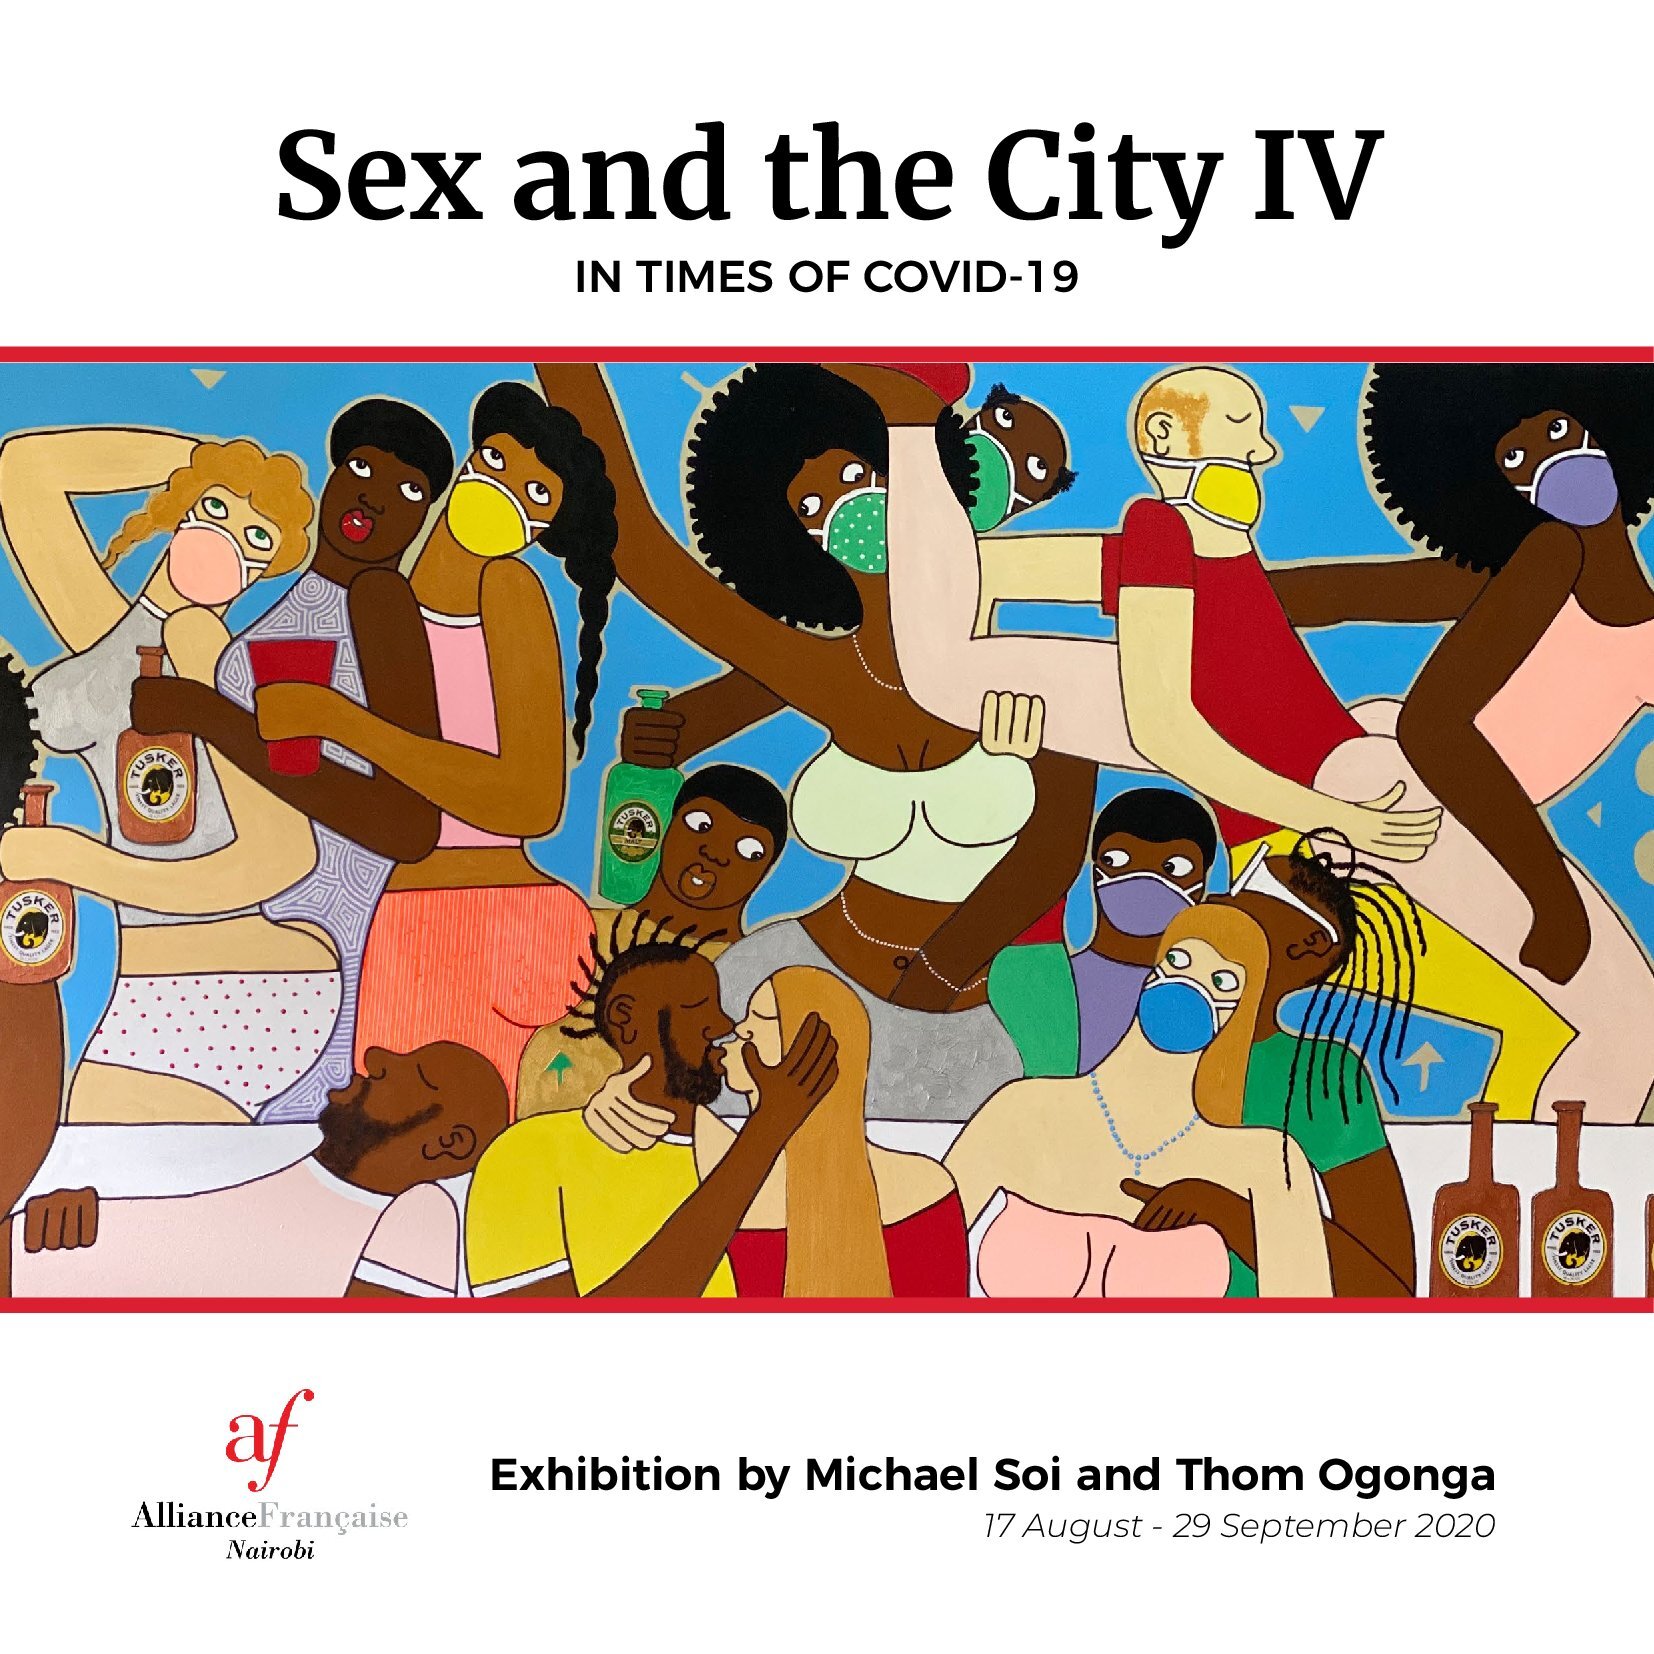 Sex-and-the-City-IV-online-catalogue_00001